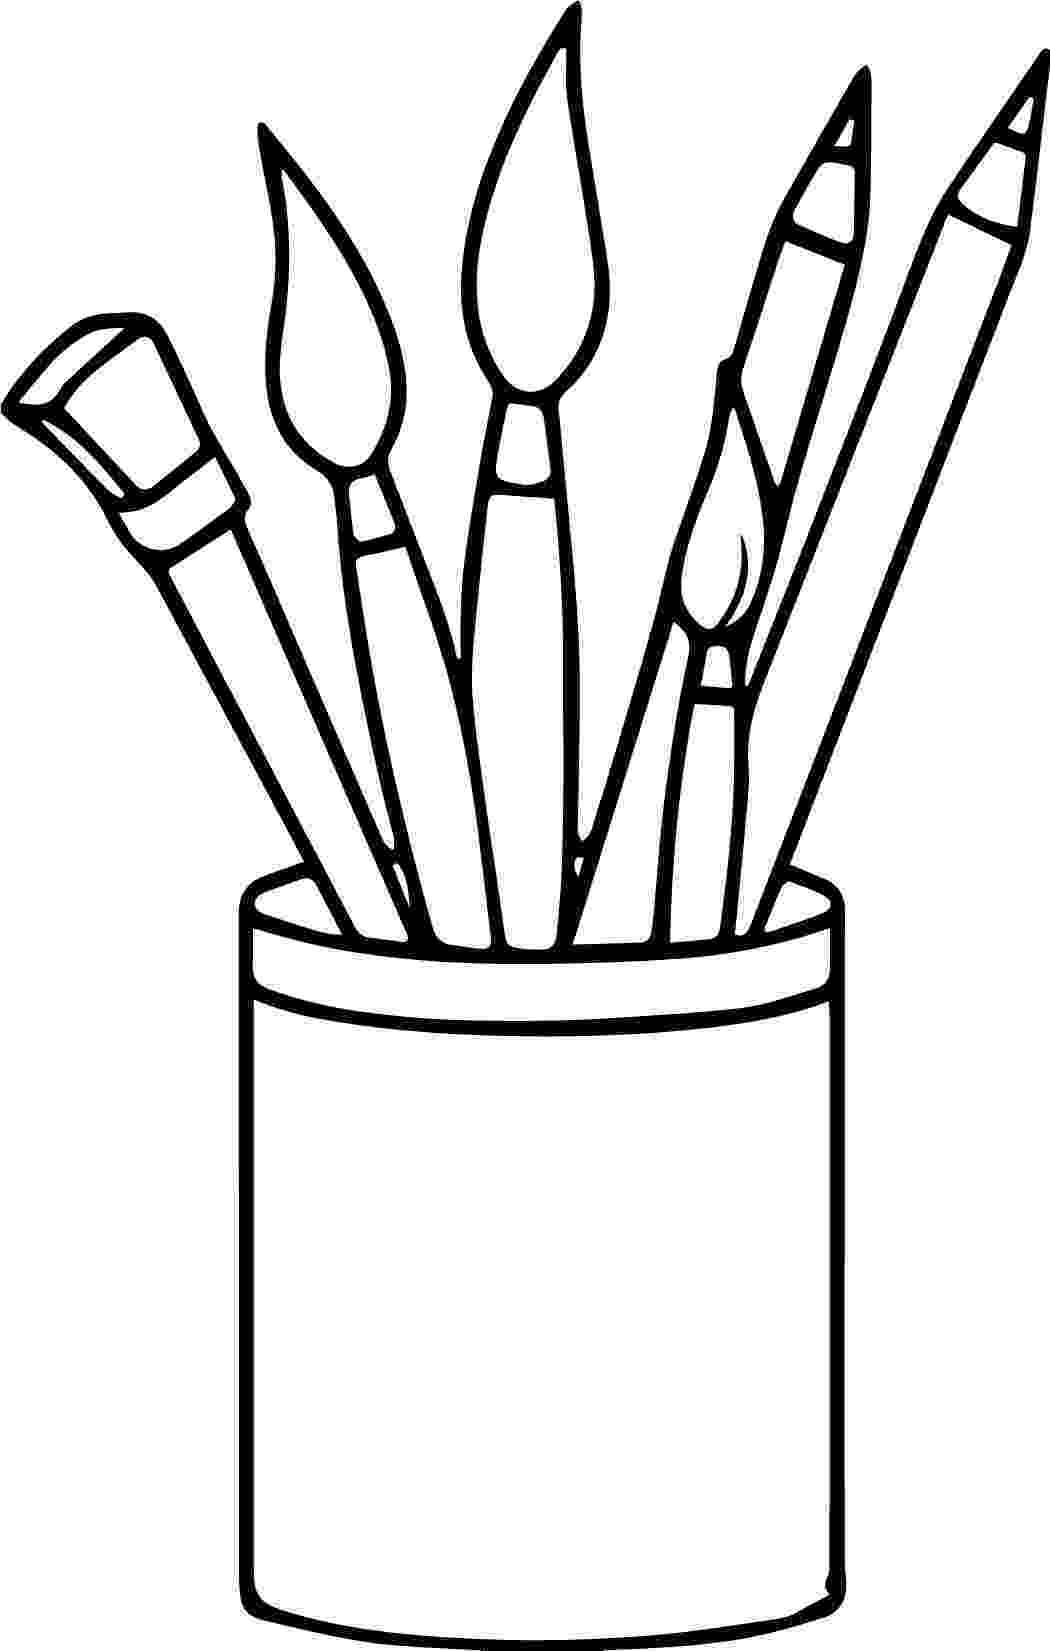 printable pictures to paint for kids nice art supplies pencils paint brushes coloring page to kids for paint printable pictures 